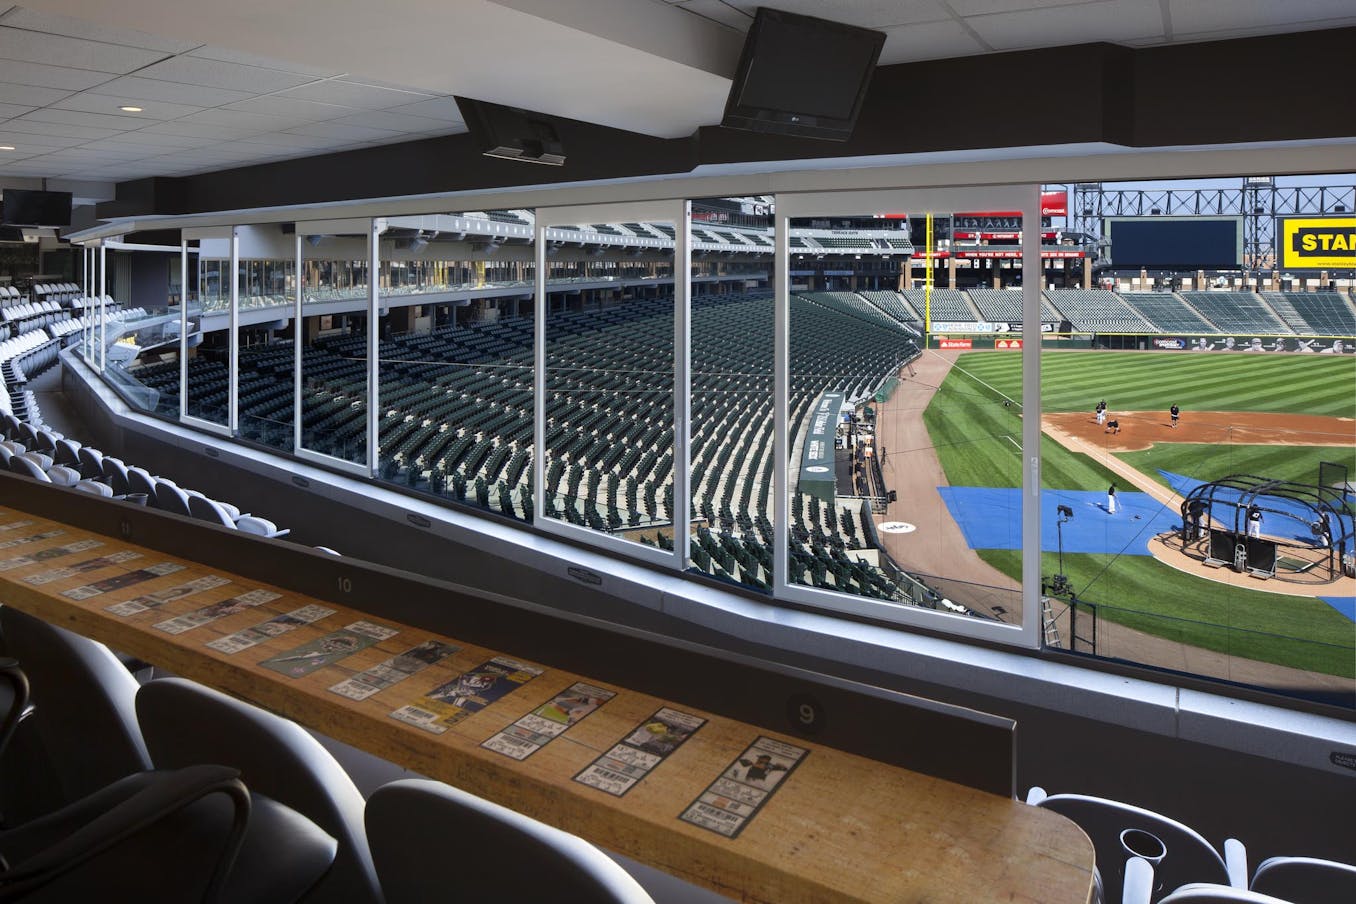 Commercial Sliding Glass Walls at Chicago Whitesox Stadium Arena - Closing Interior Day View